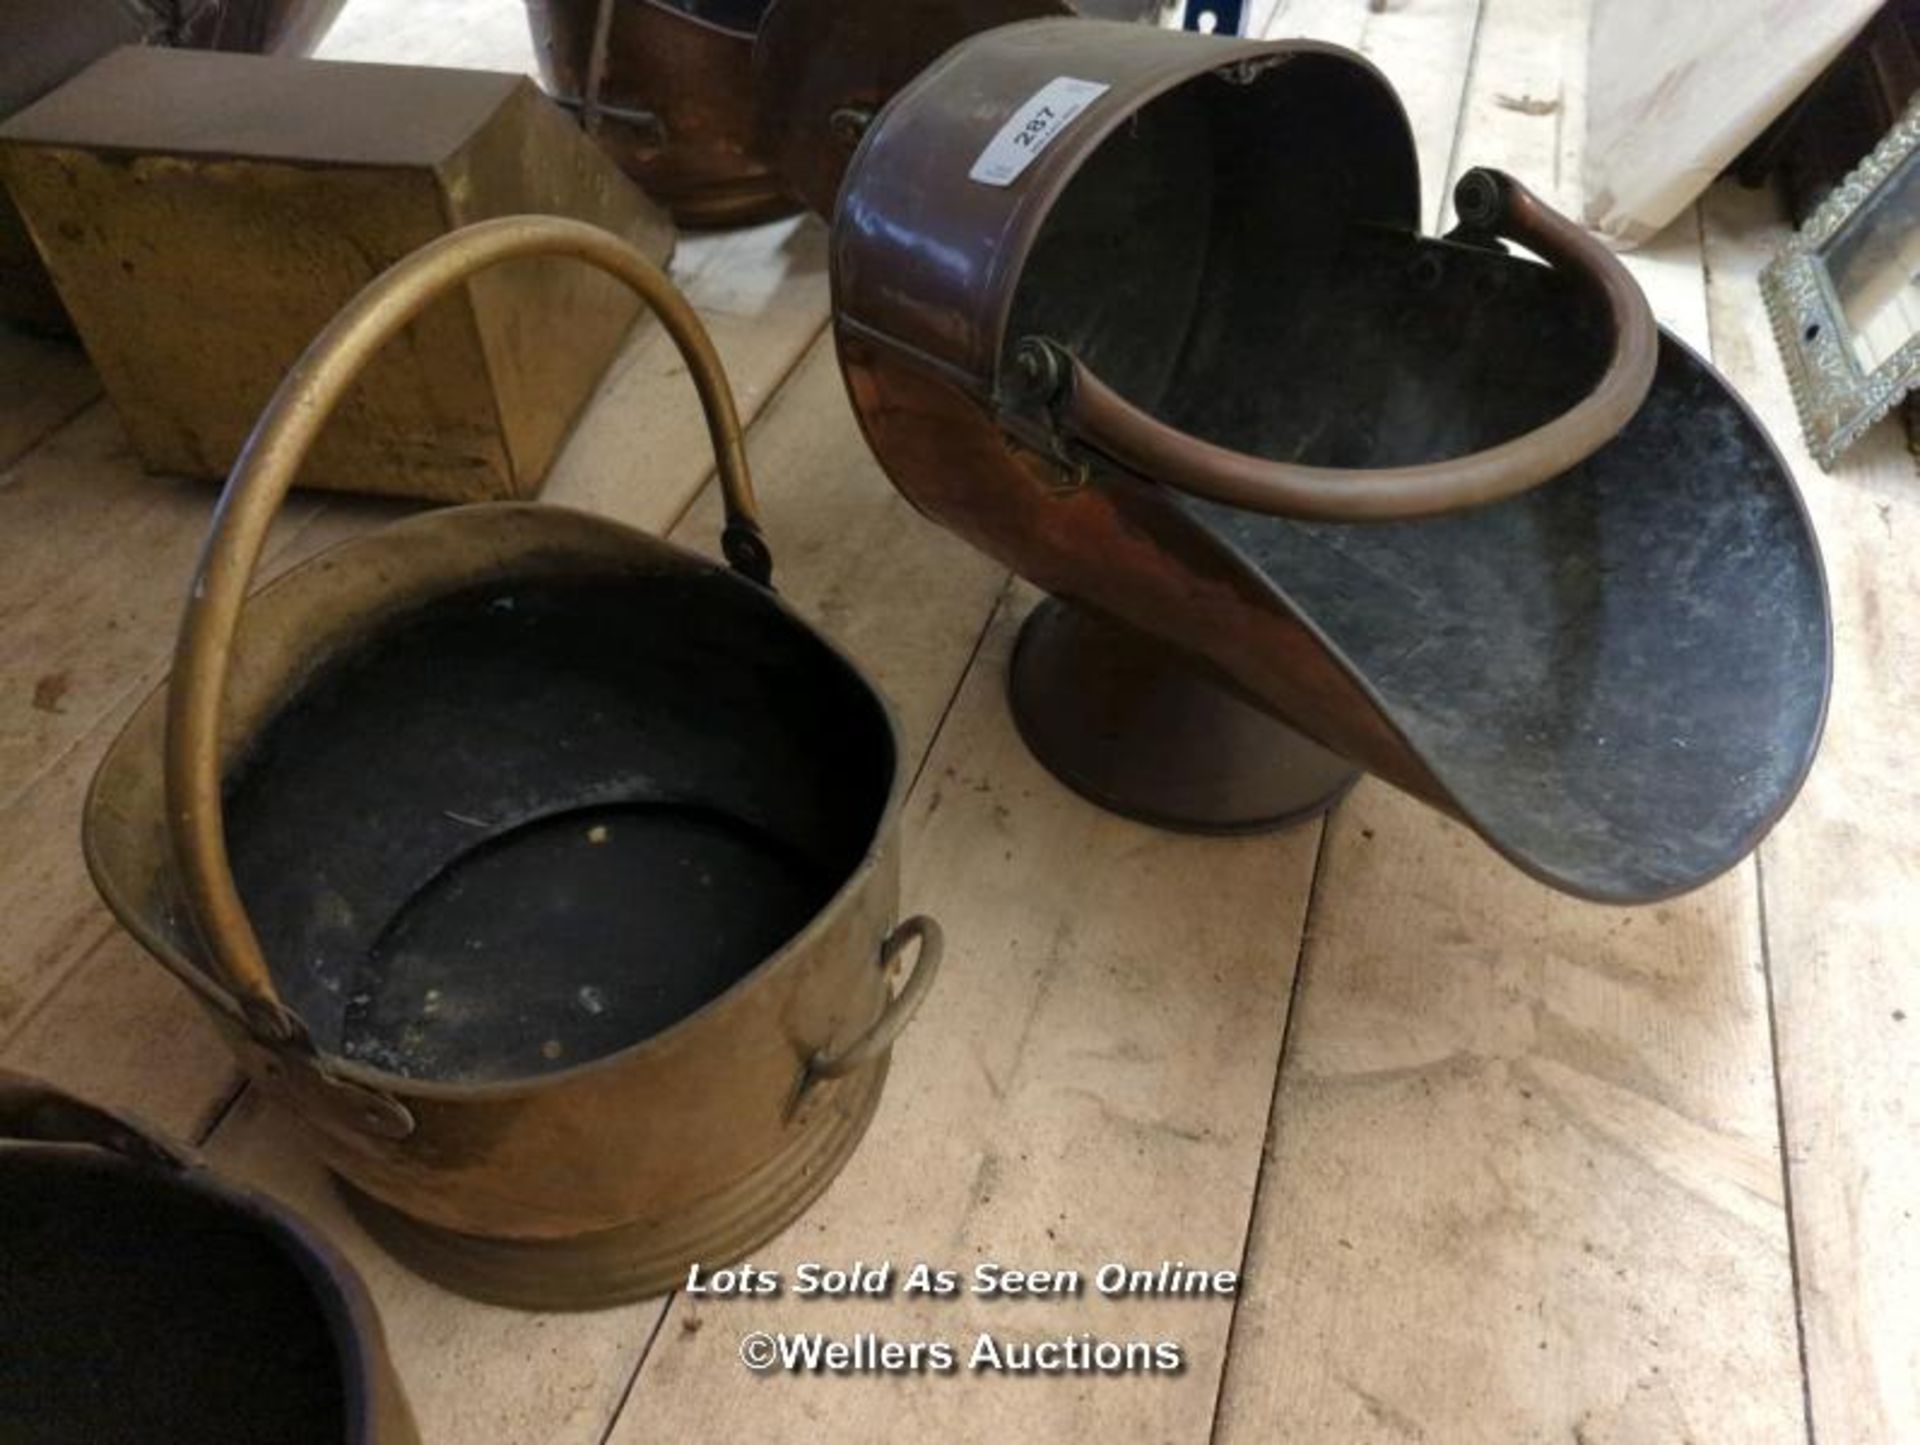 *ONE COPPER COAL SHUTTLE AND ONE COPPER COAL BUCKET / ALL LOTS ARE LOCATED AT AUTHENTIC